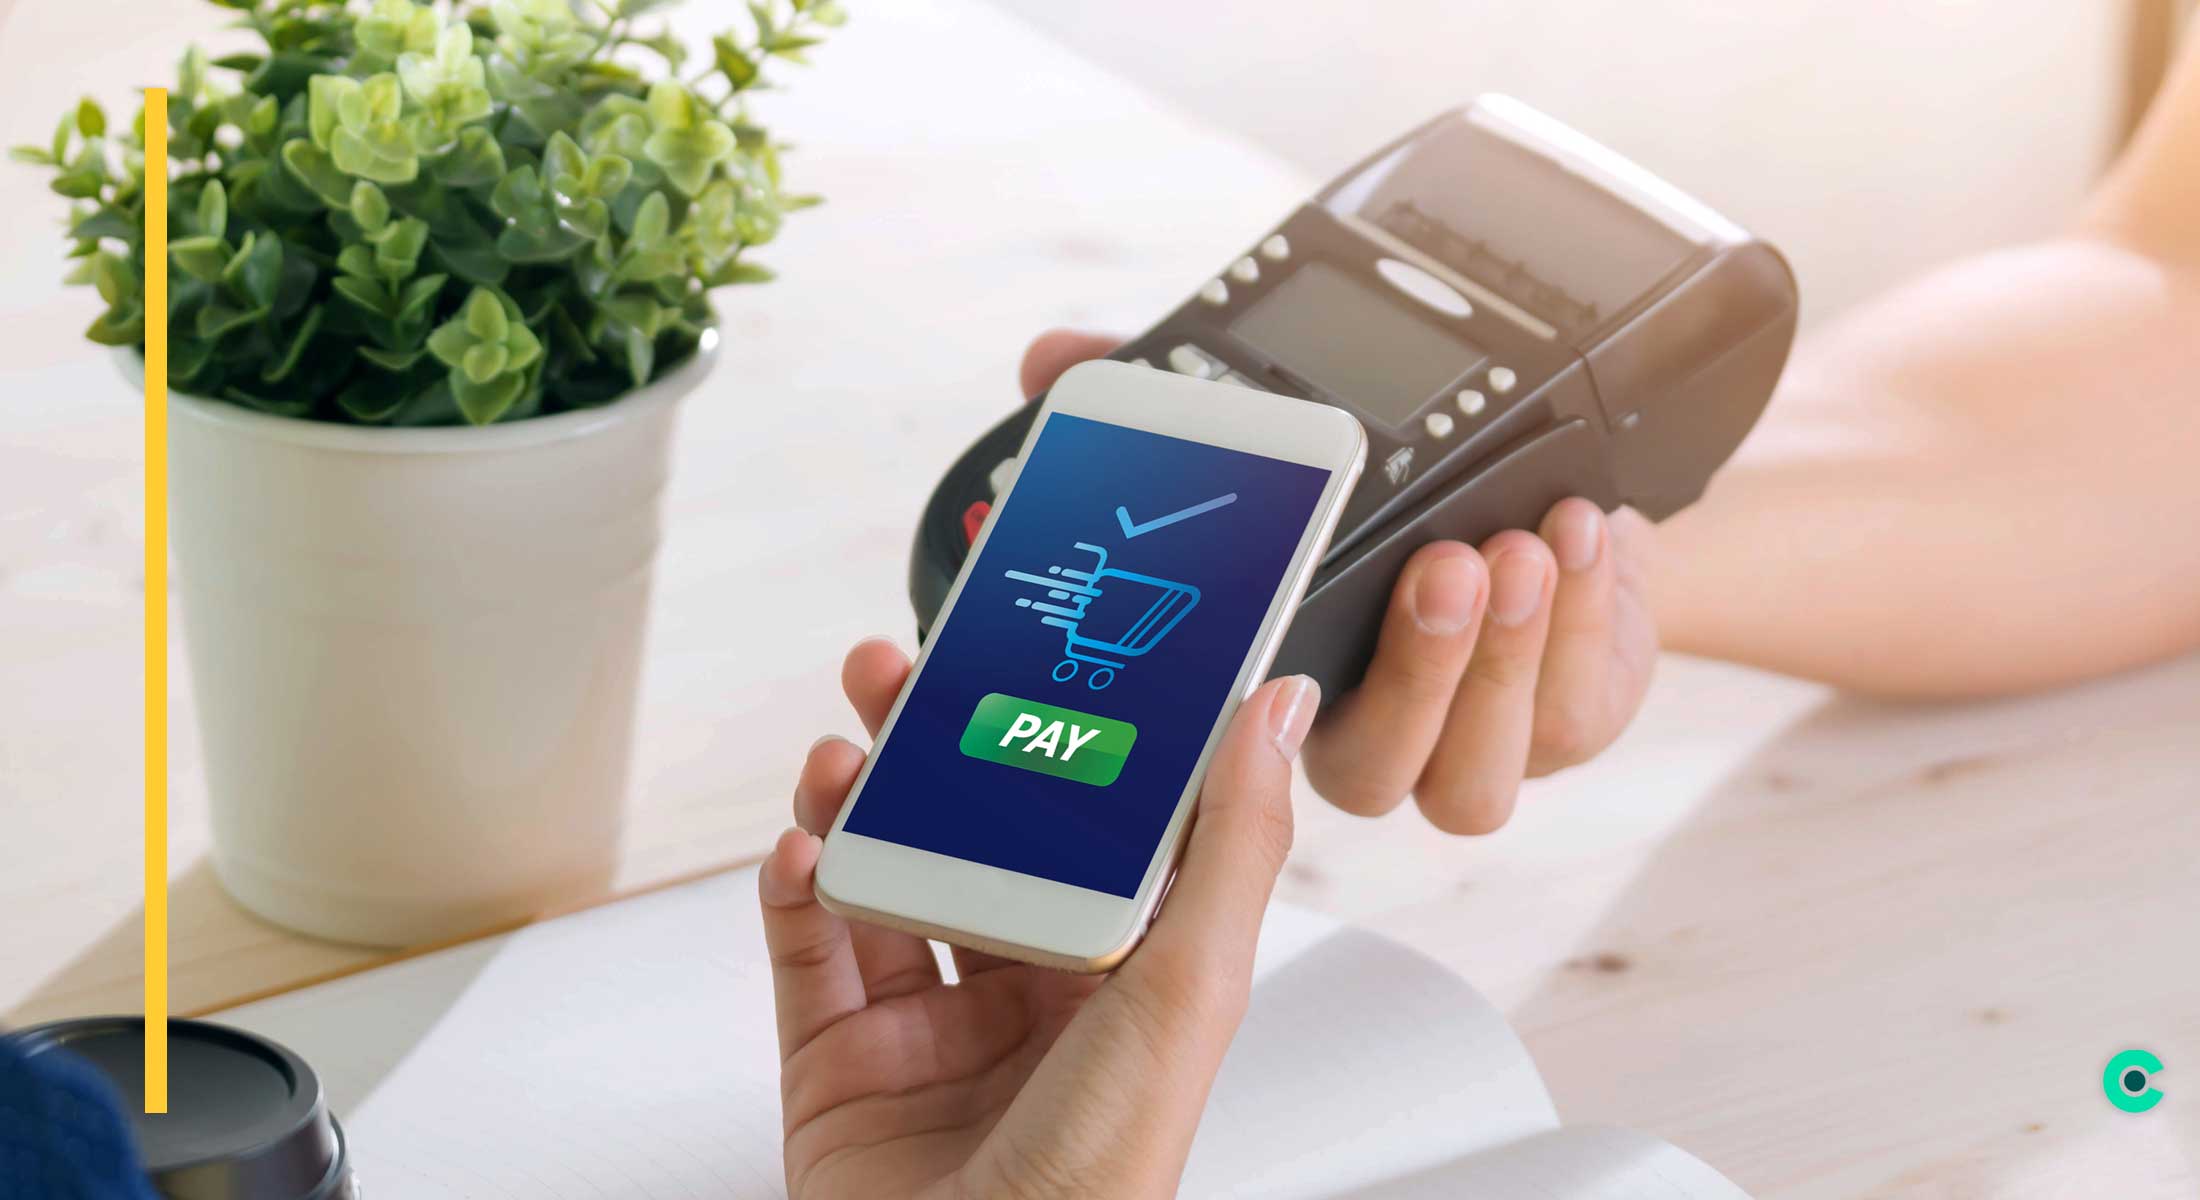 A person pays with their phone at a payment terminal